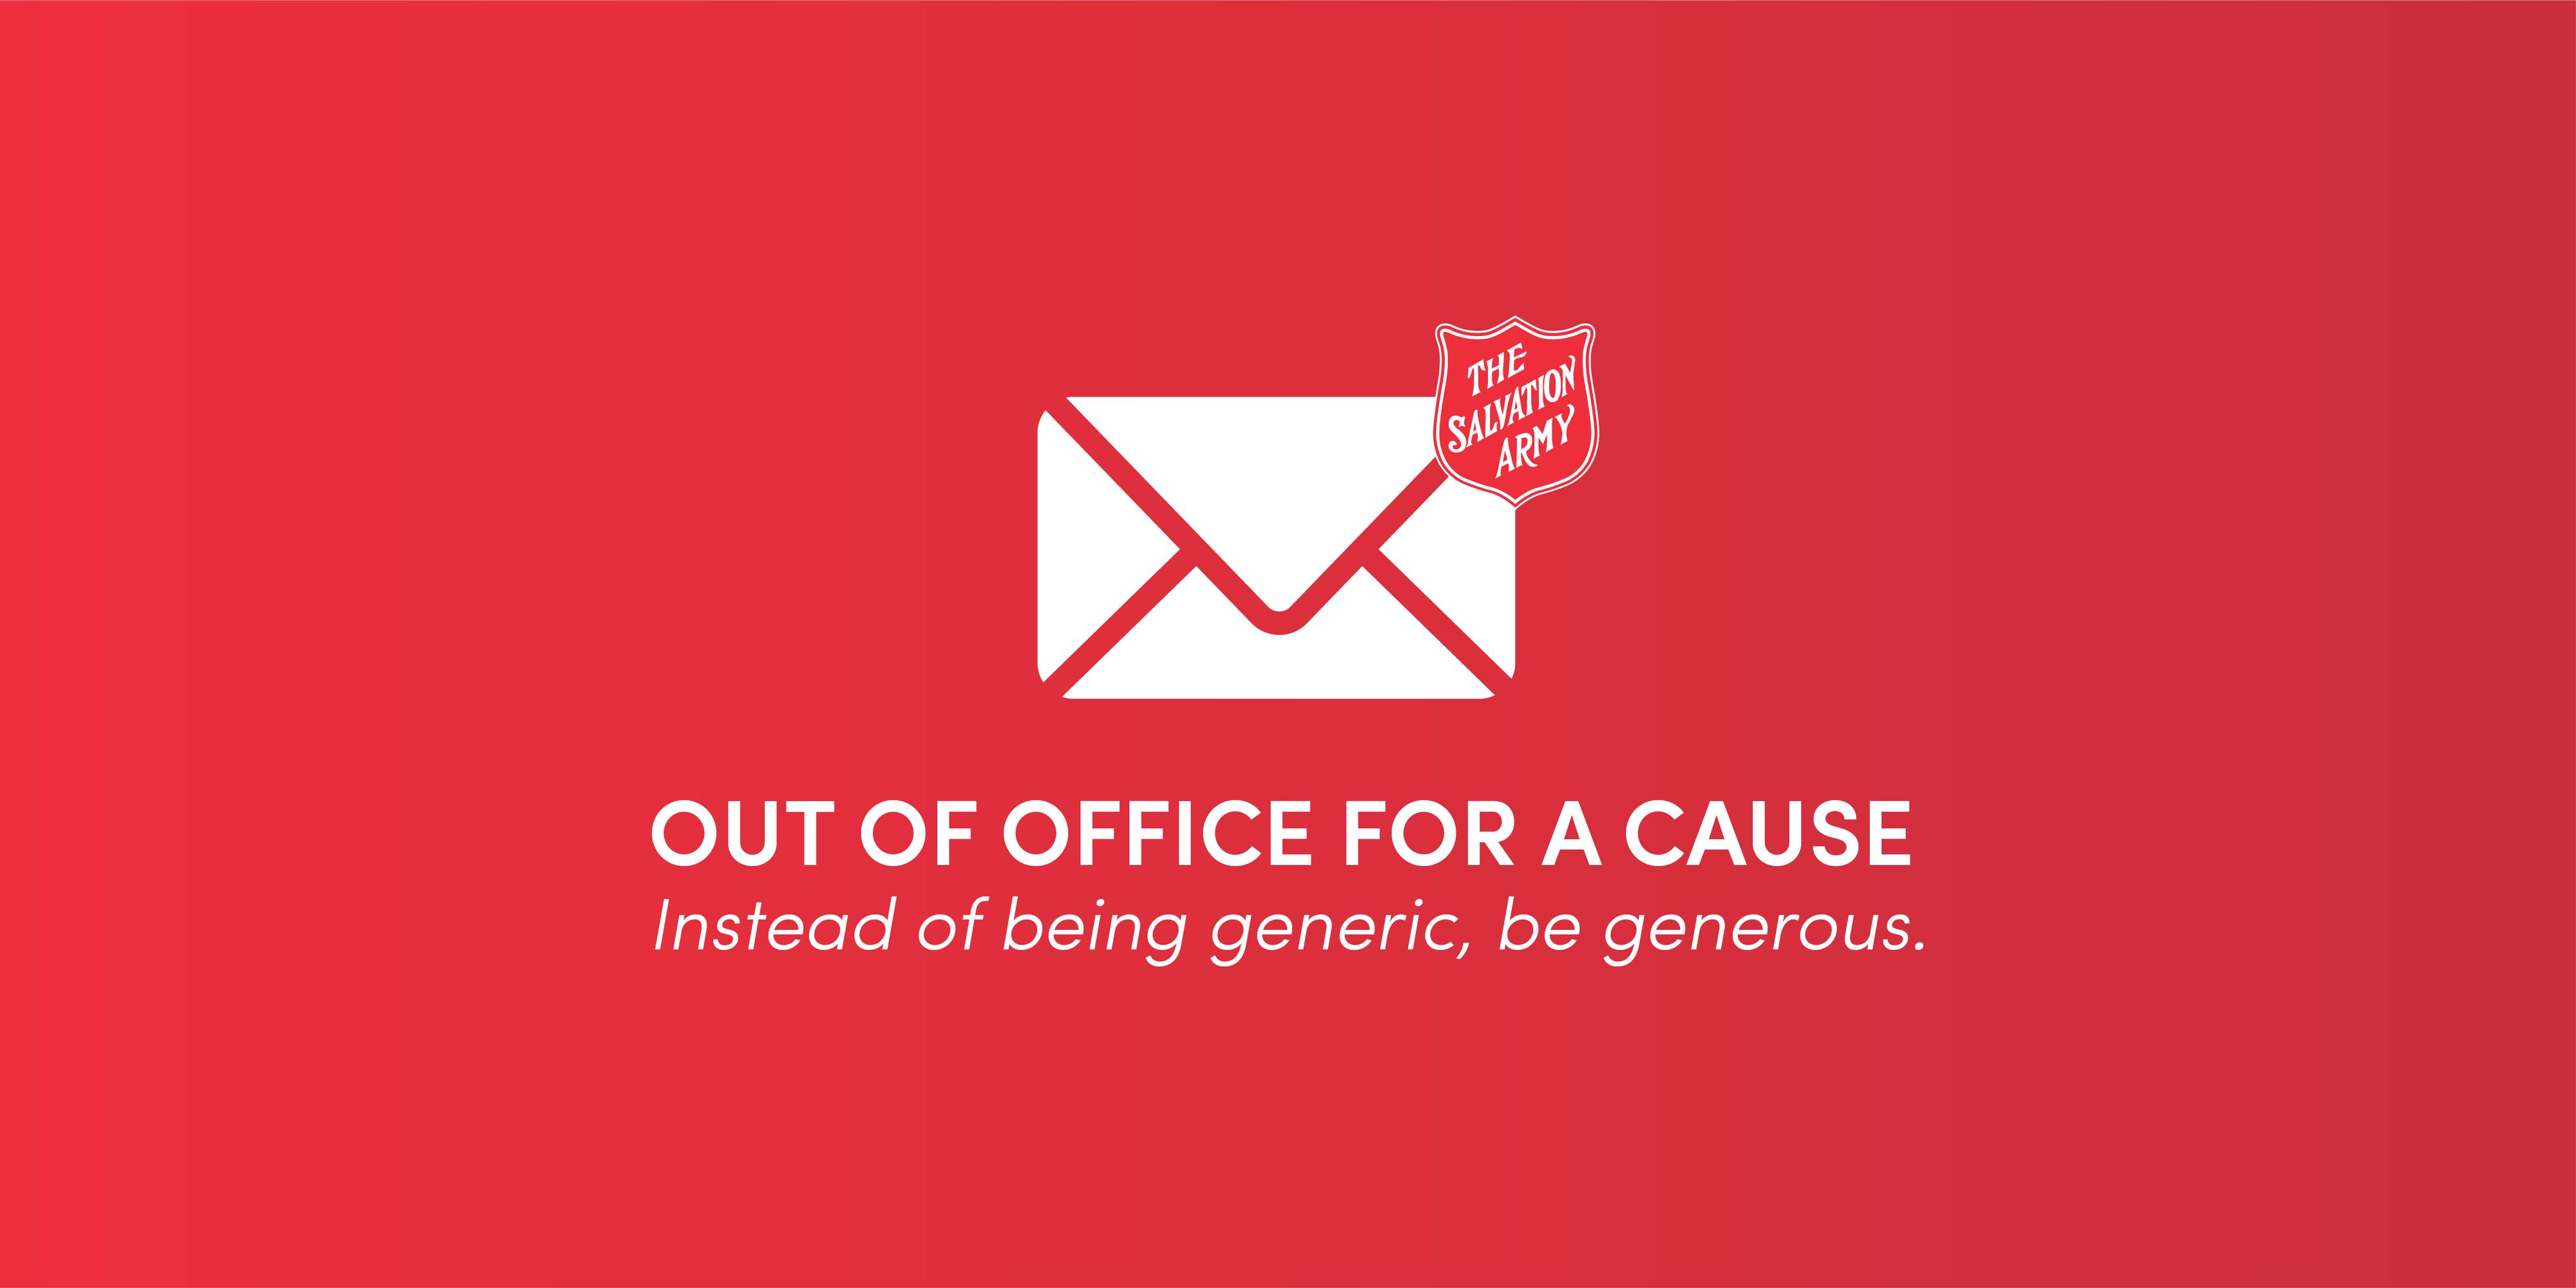 Out of Office for a Cause